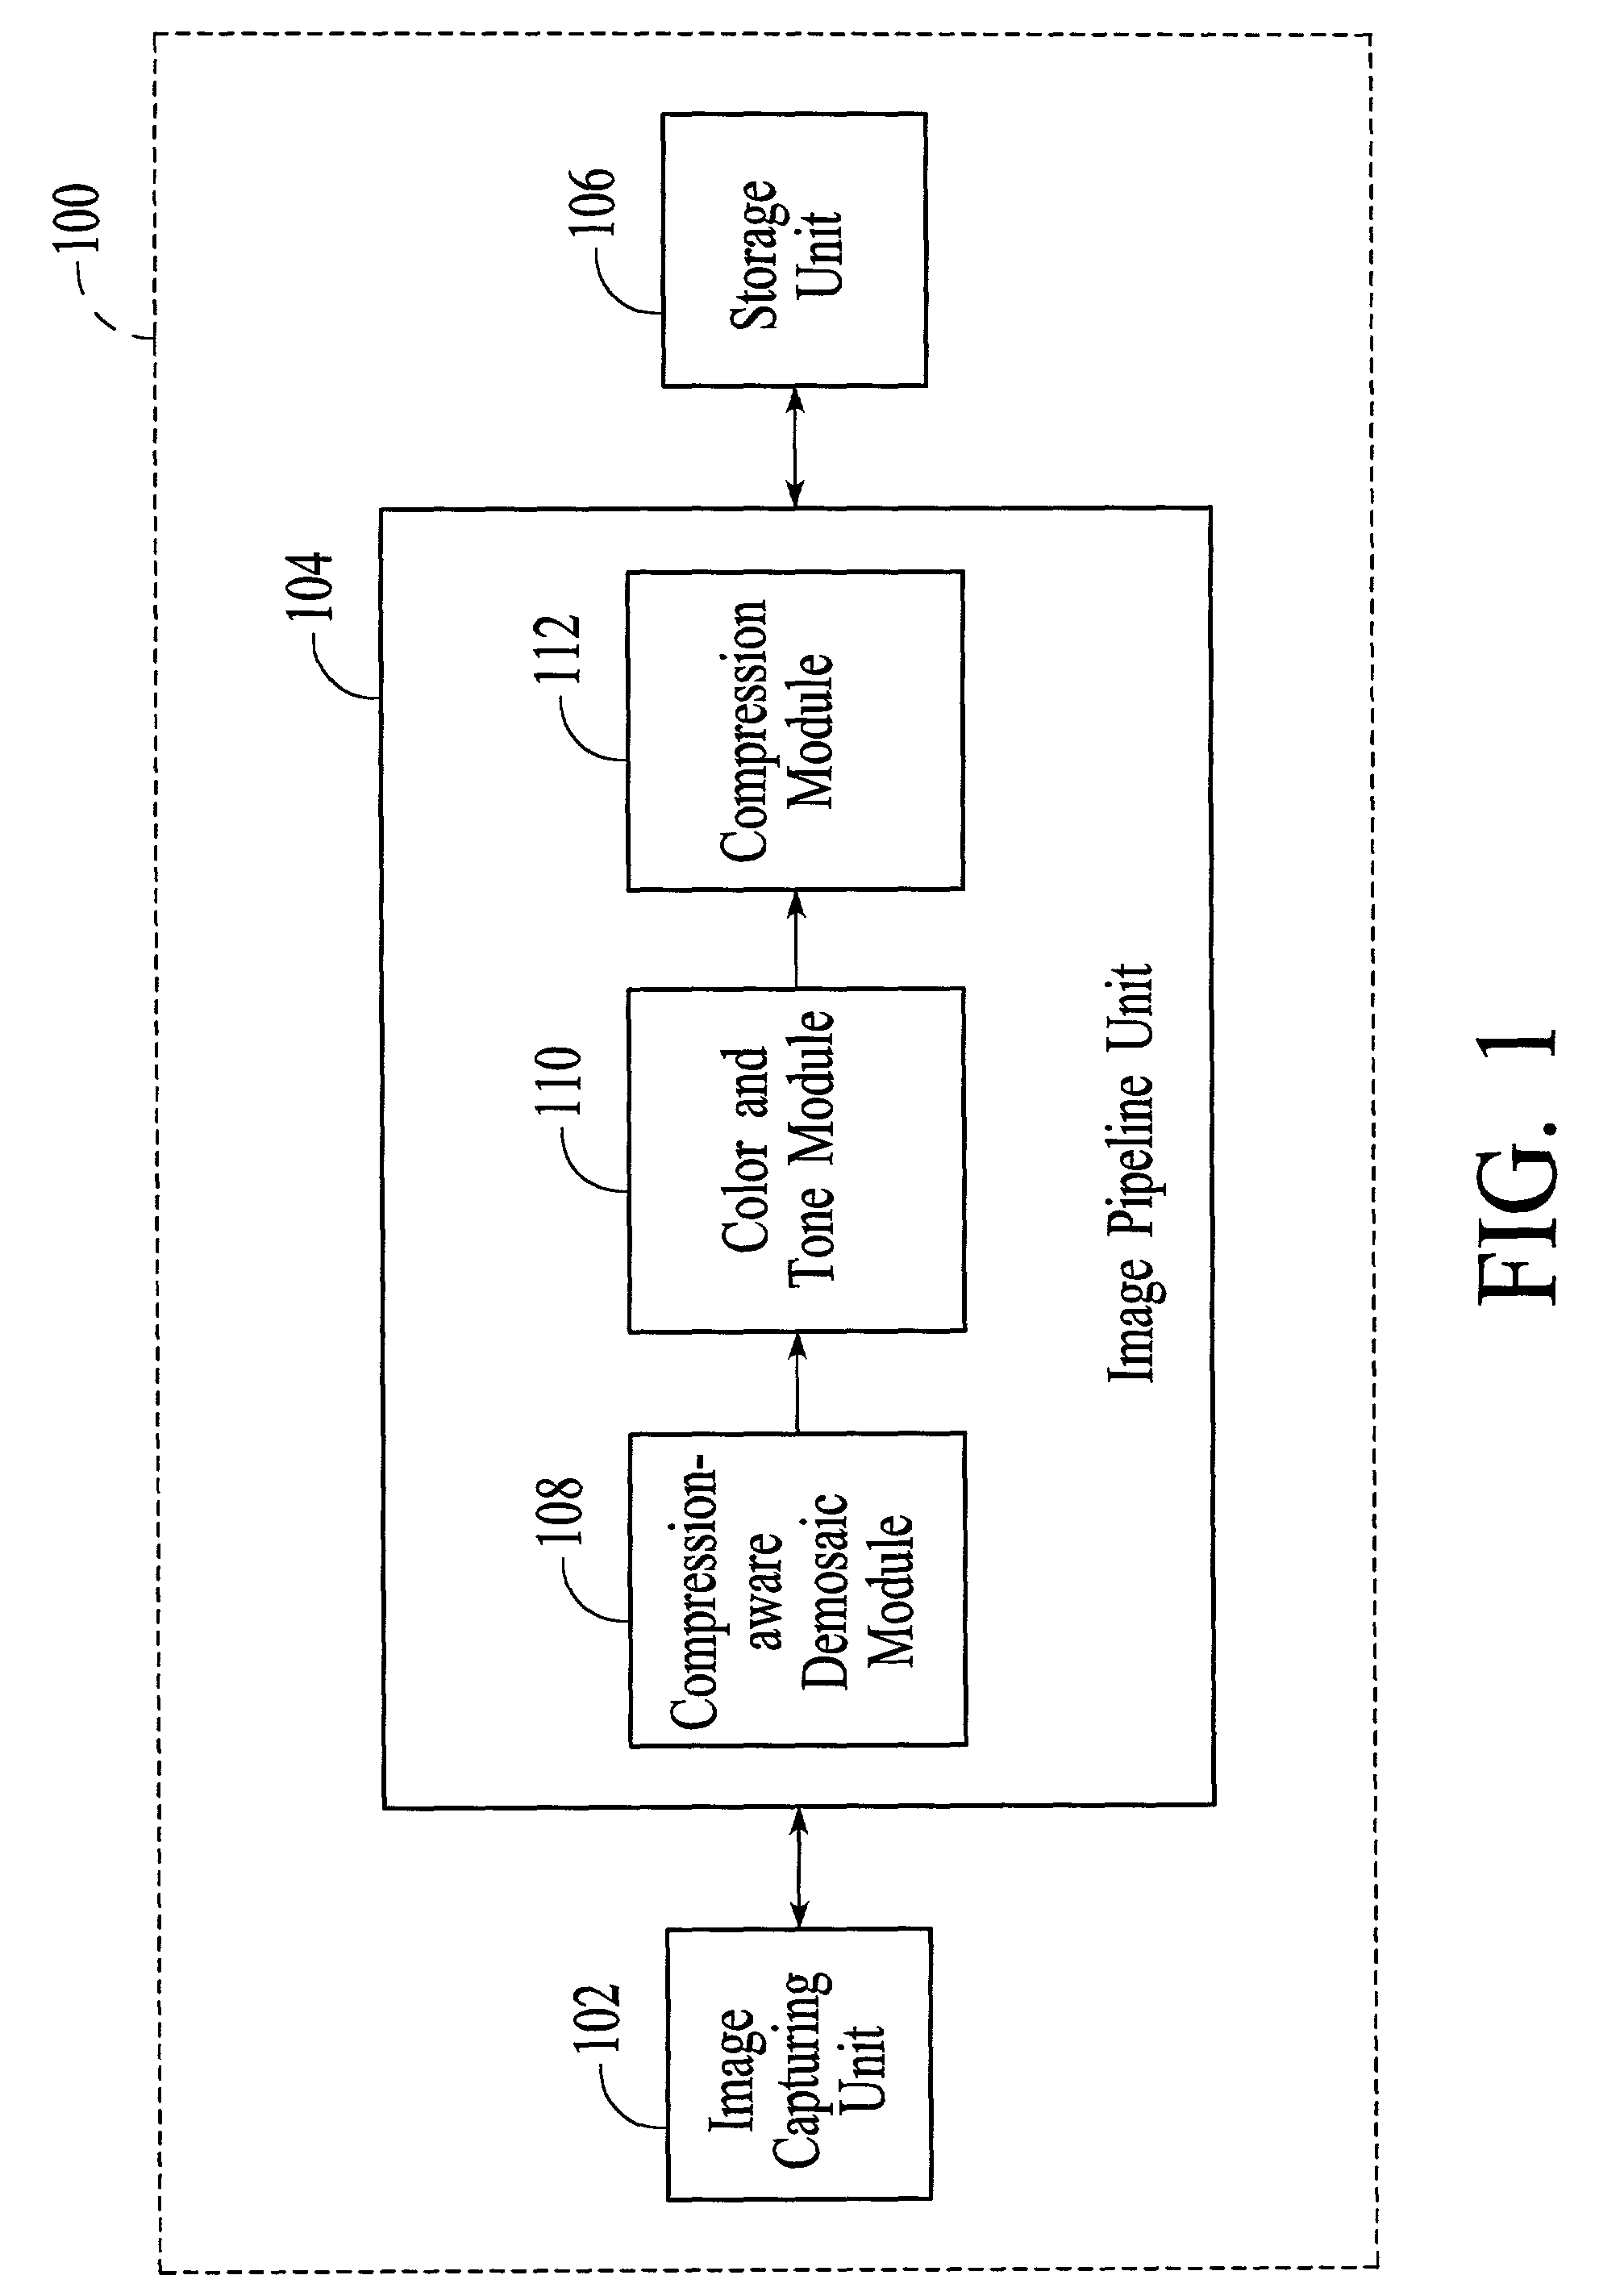 System and method for demosaicing raw data images with compression considerations